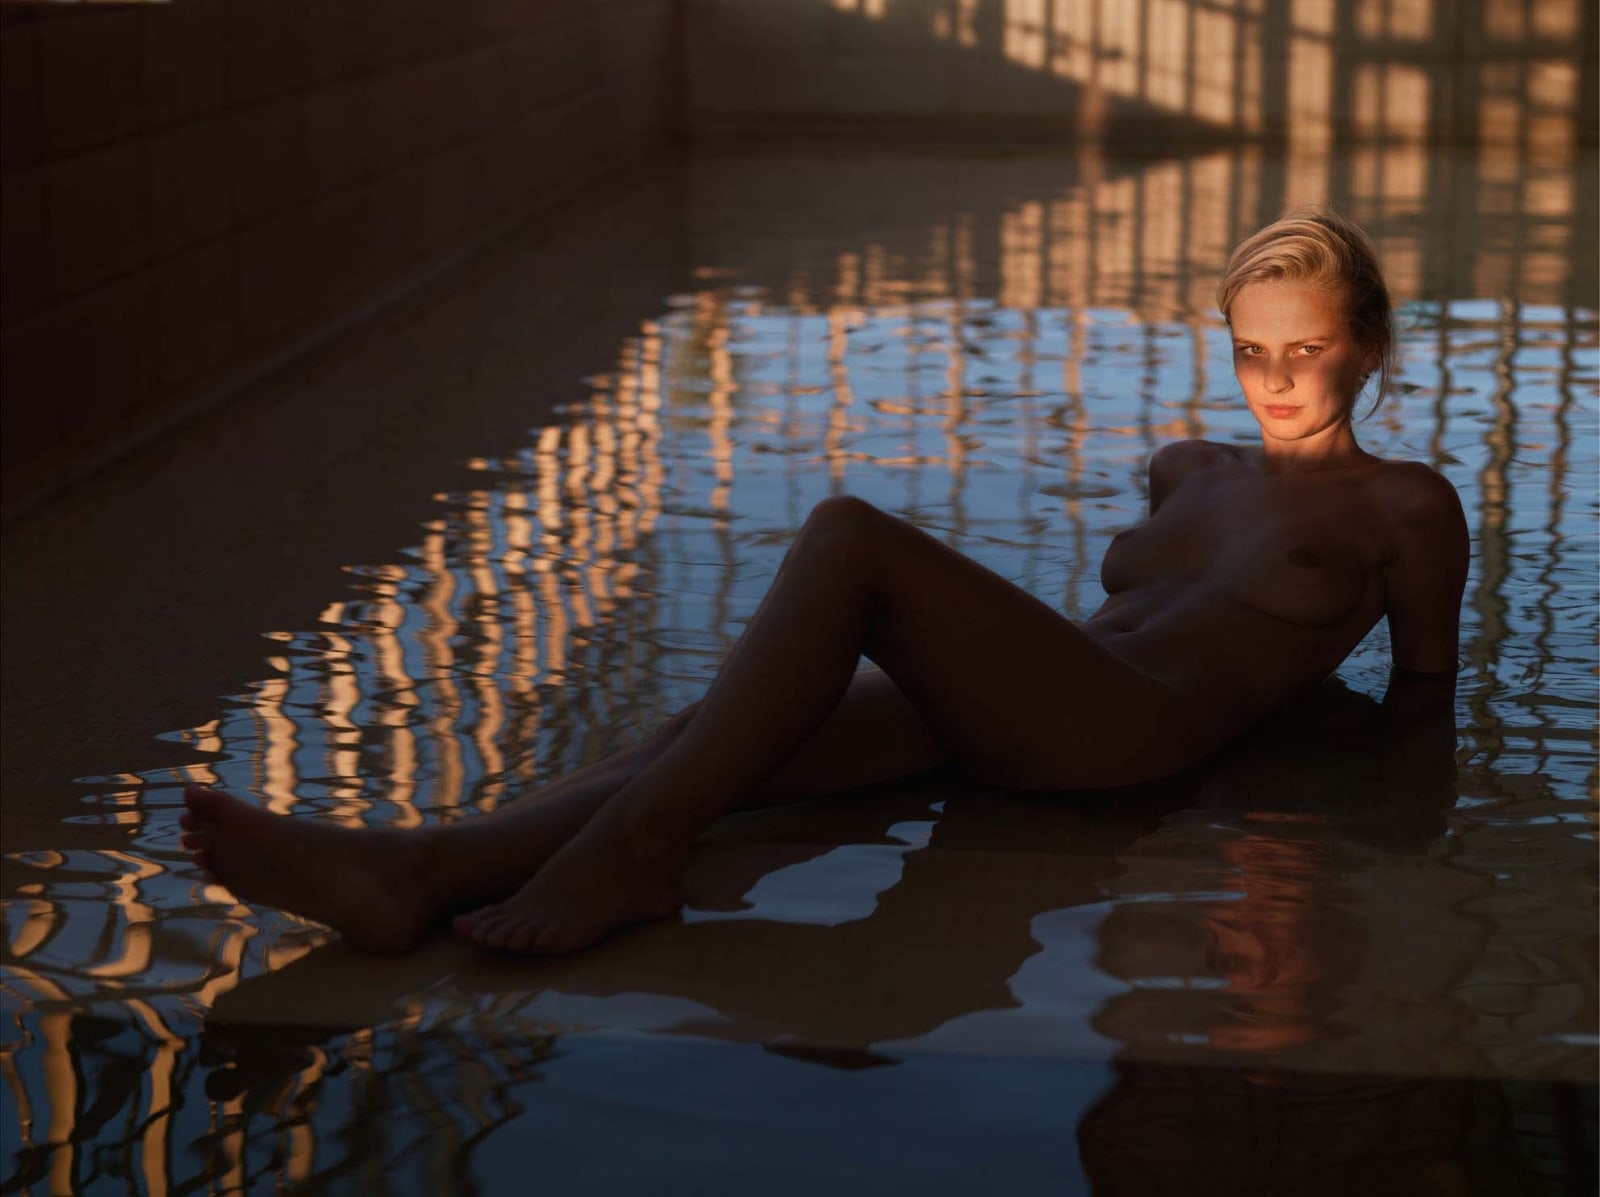 Mona Kuhn photograph of nude woman reclining in pool of water with only her head illuminated by the sun